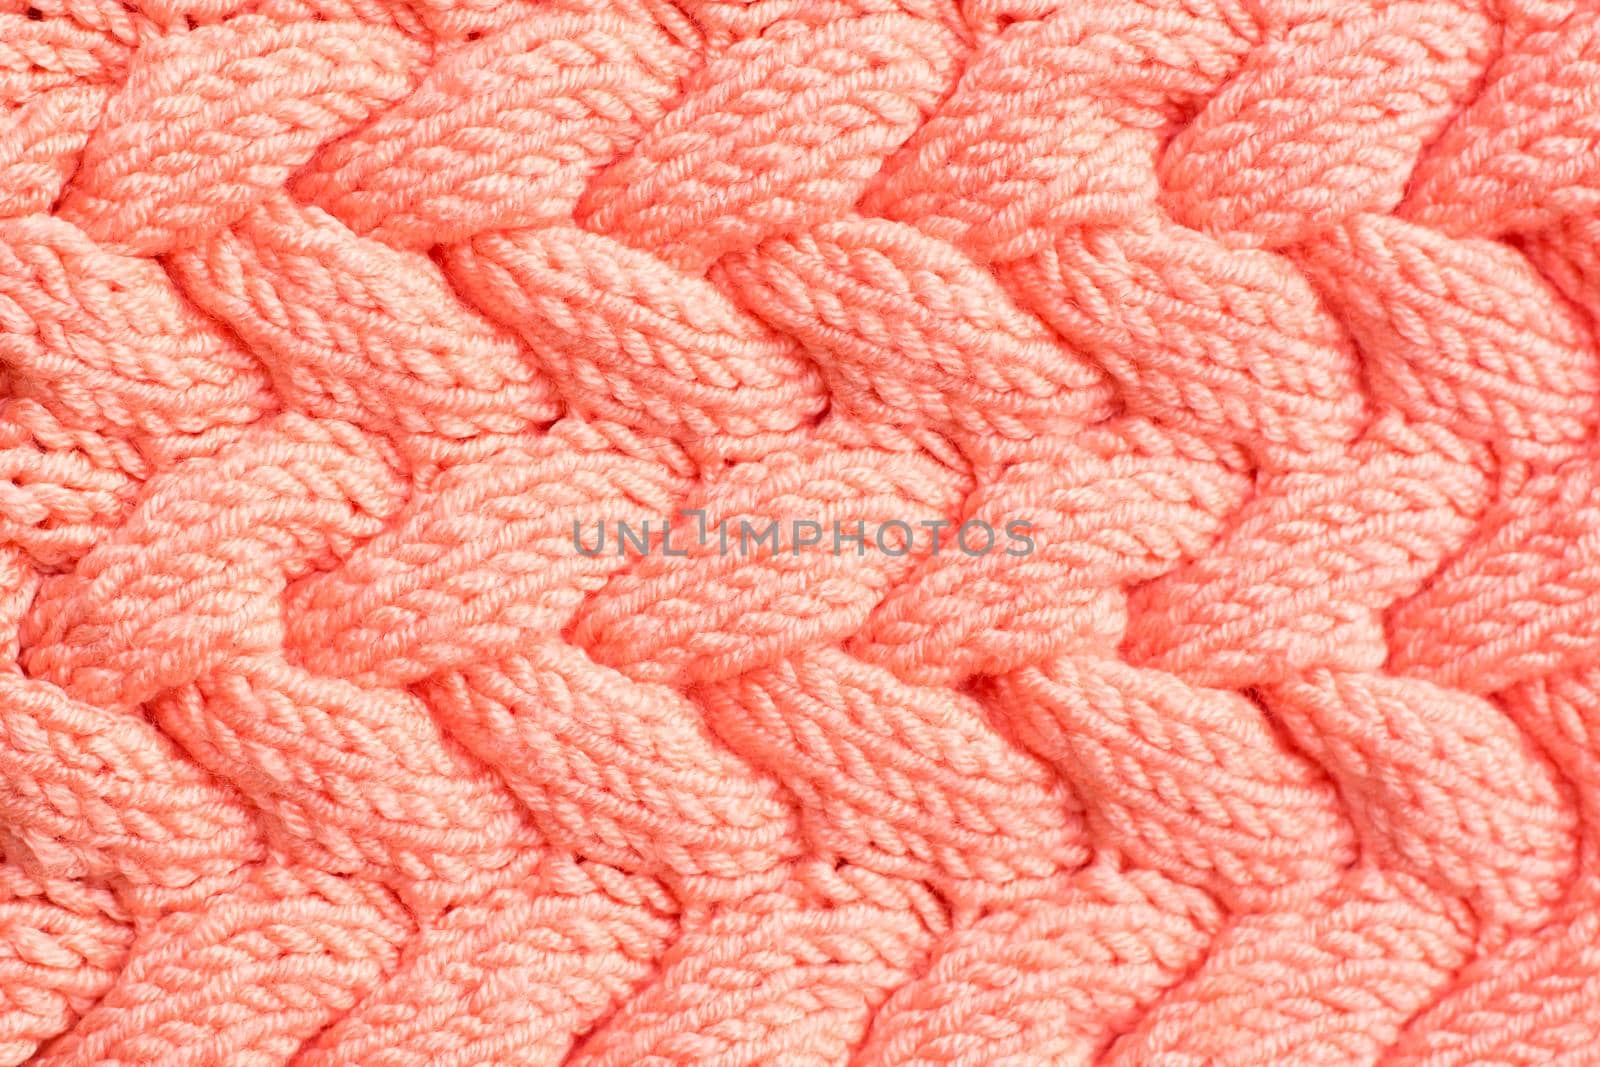 Textured background. Knitted fabric in peach color in the form of intertwined braids. Top view